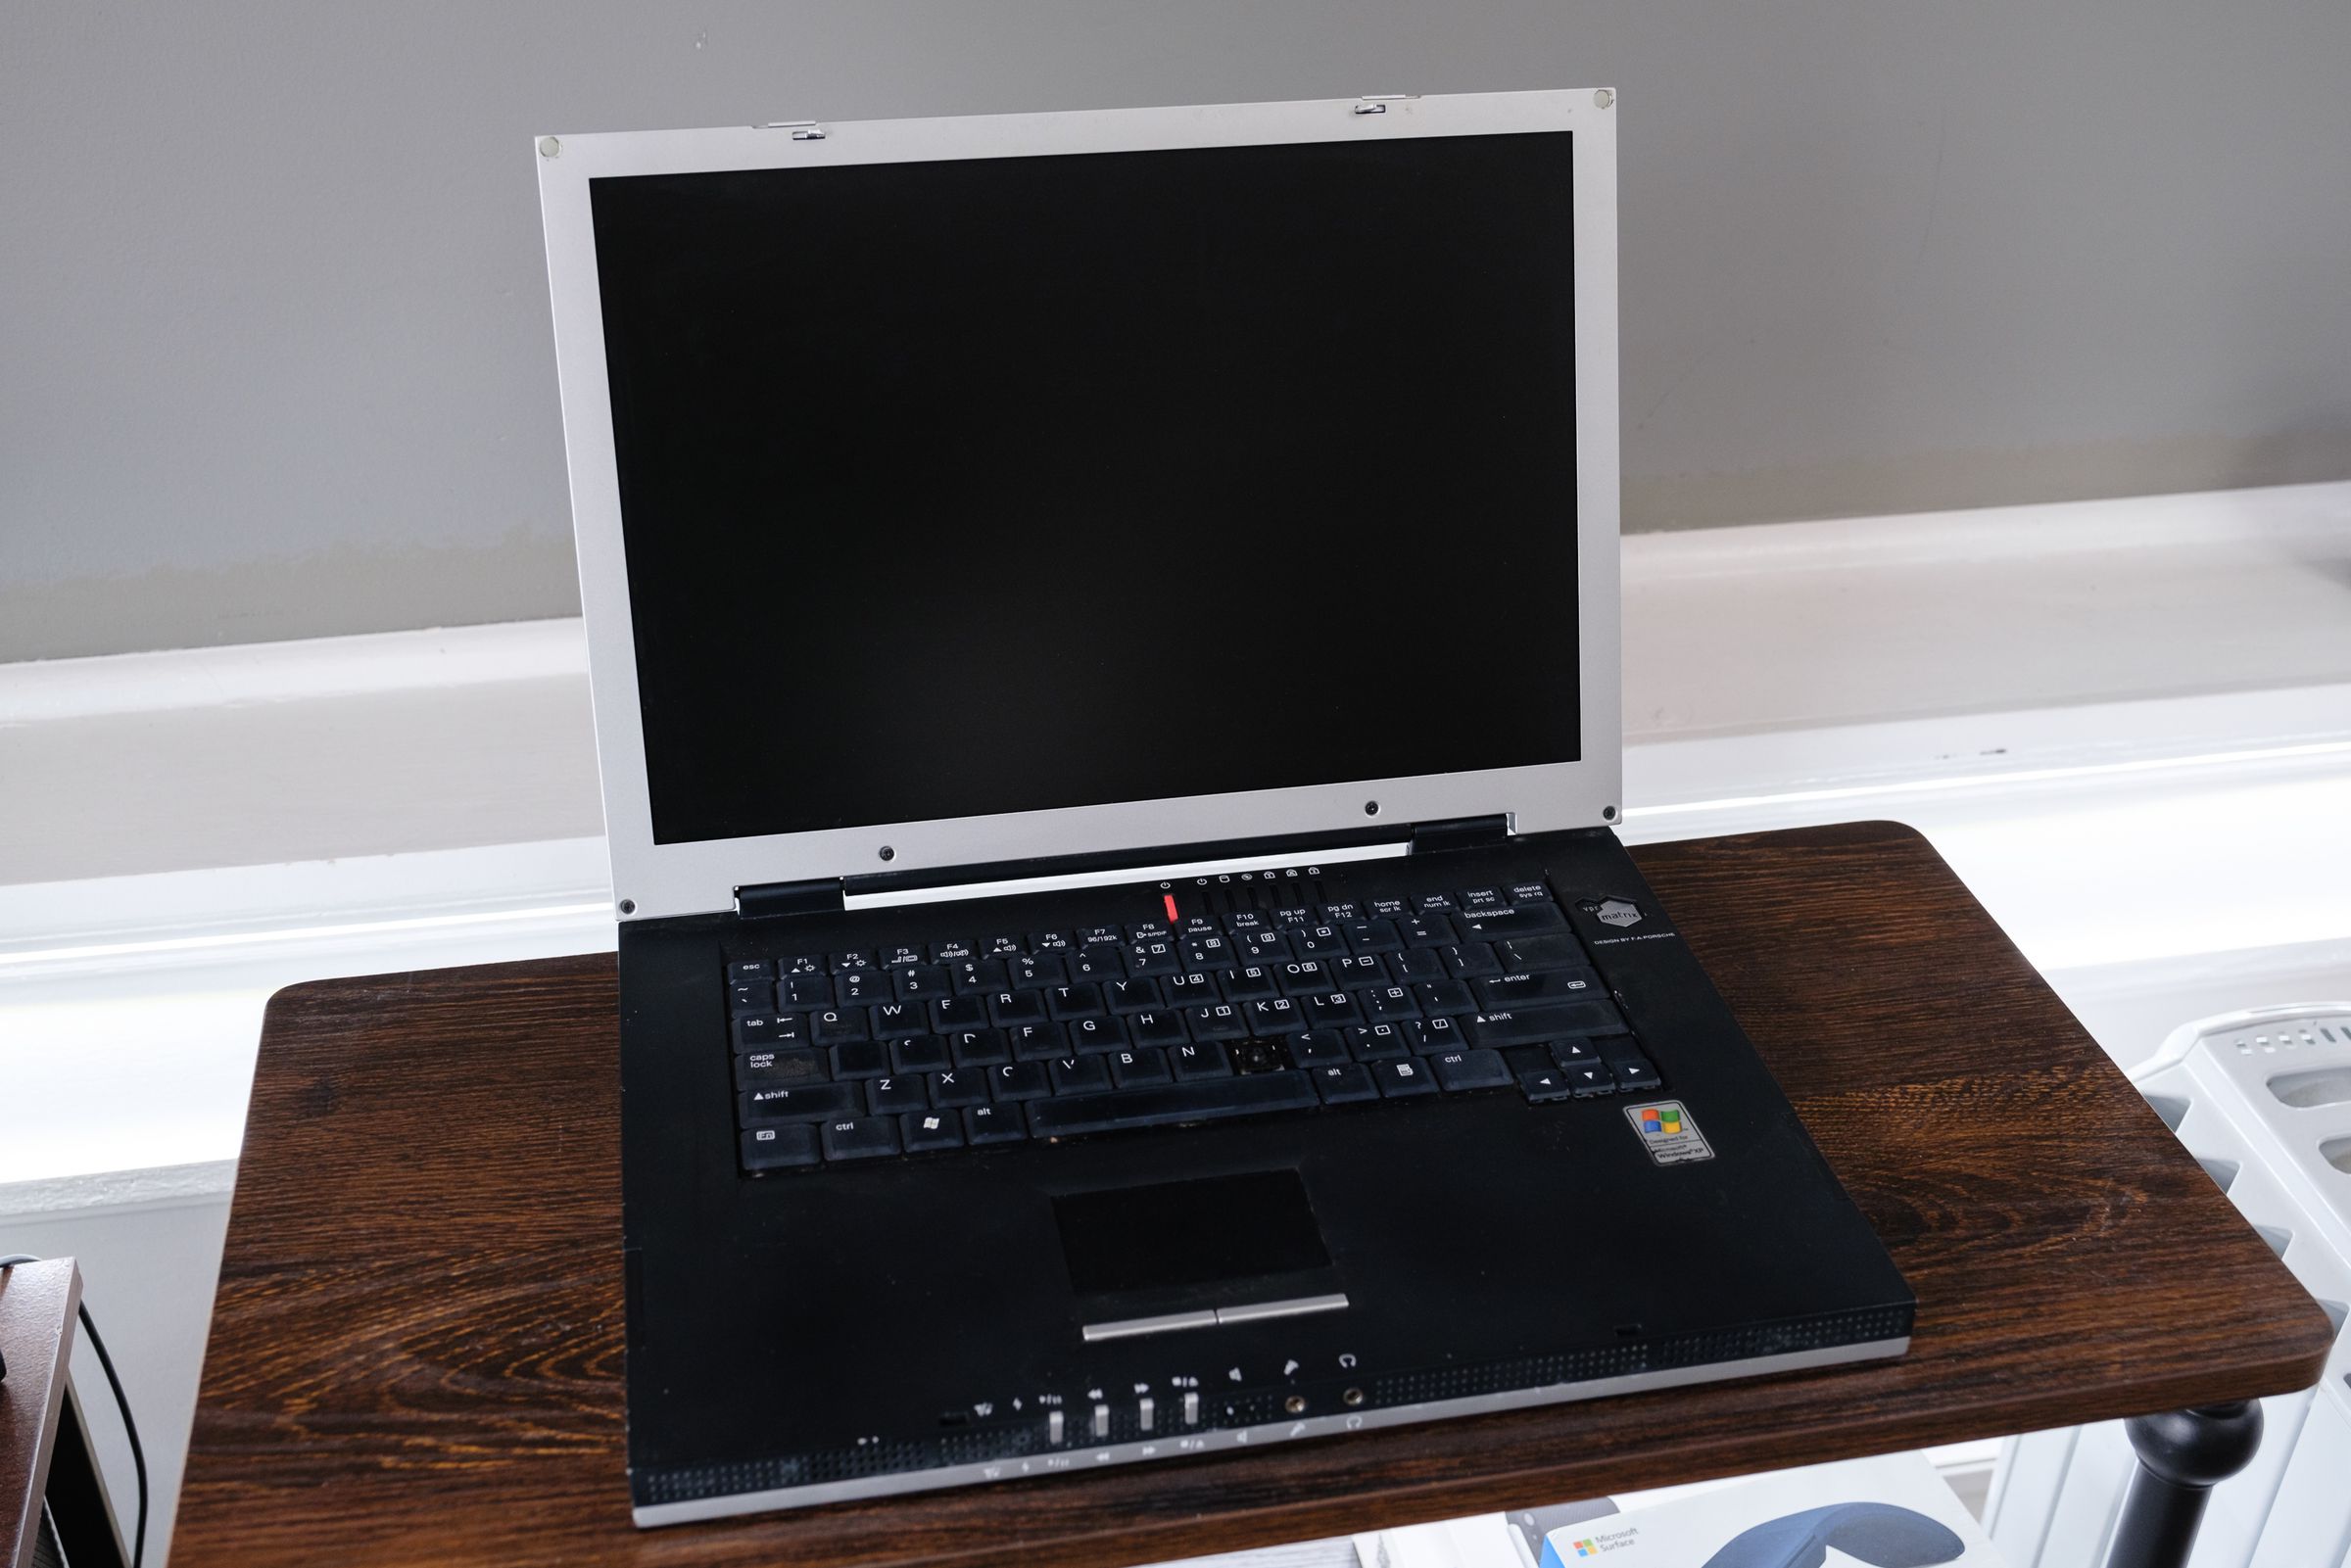 A silver and black VPR Matrix laptop open on a wooden table.